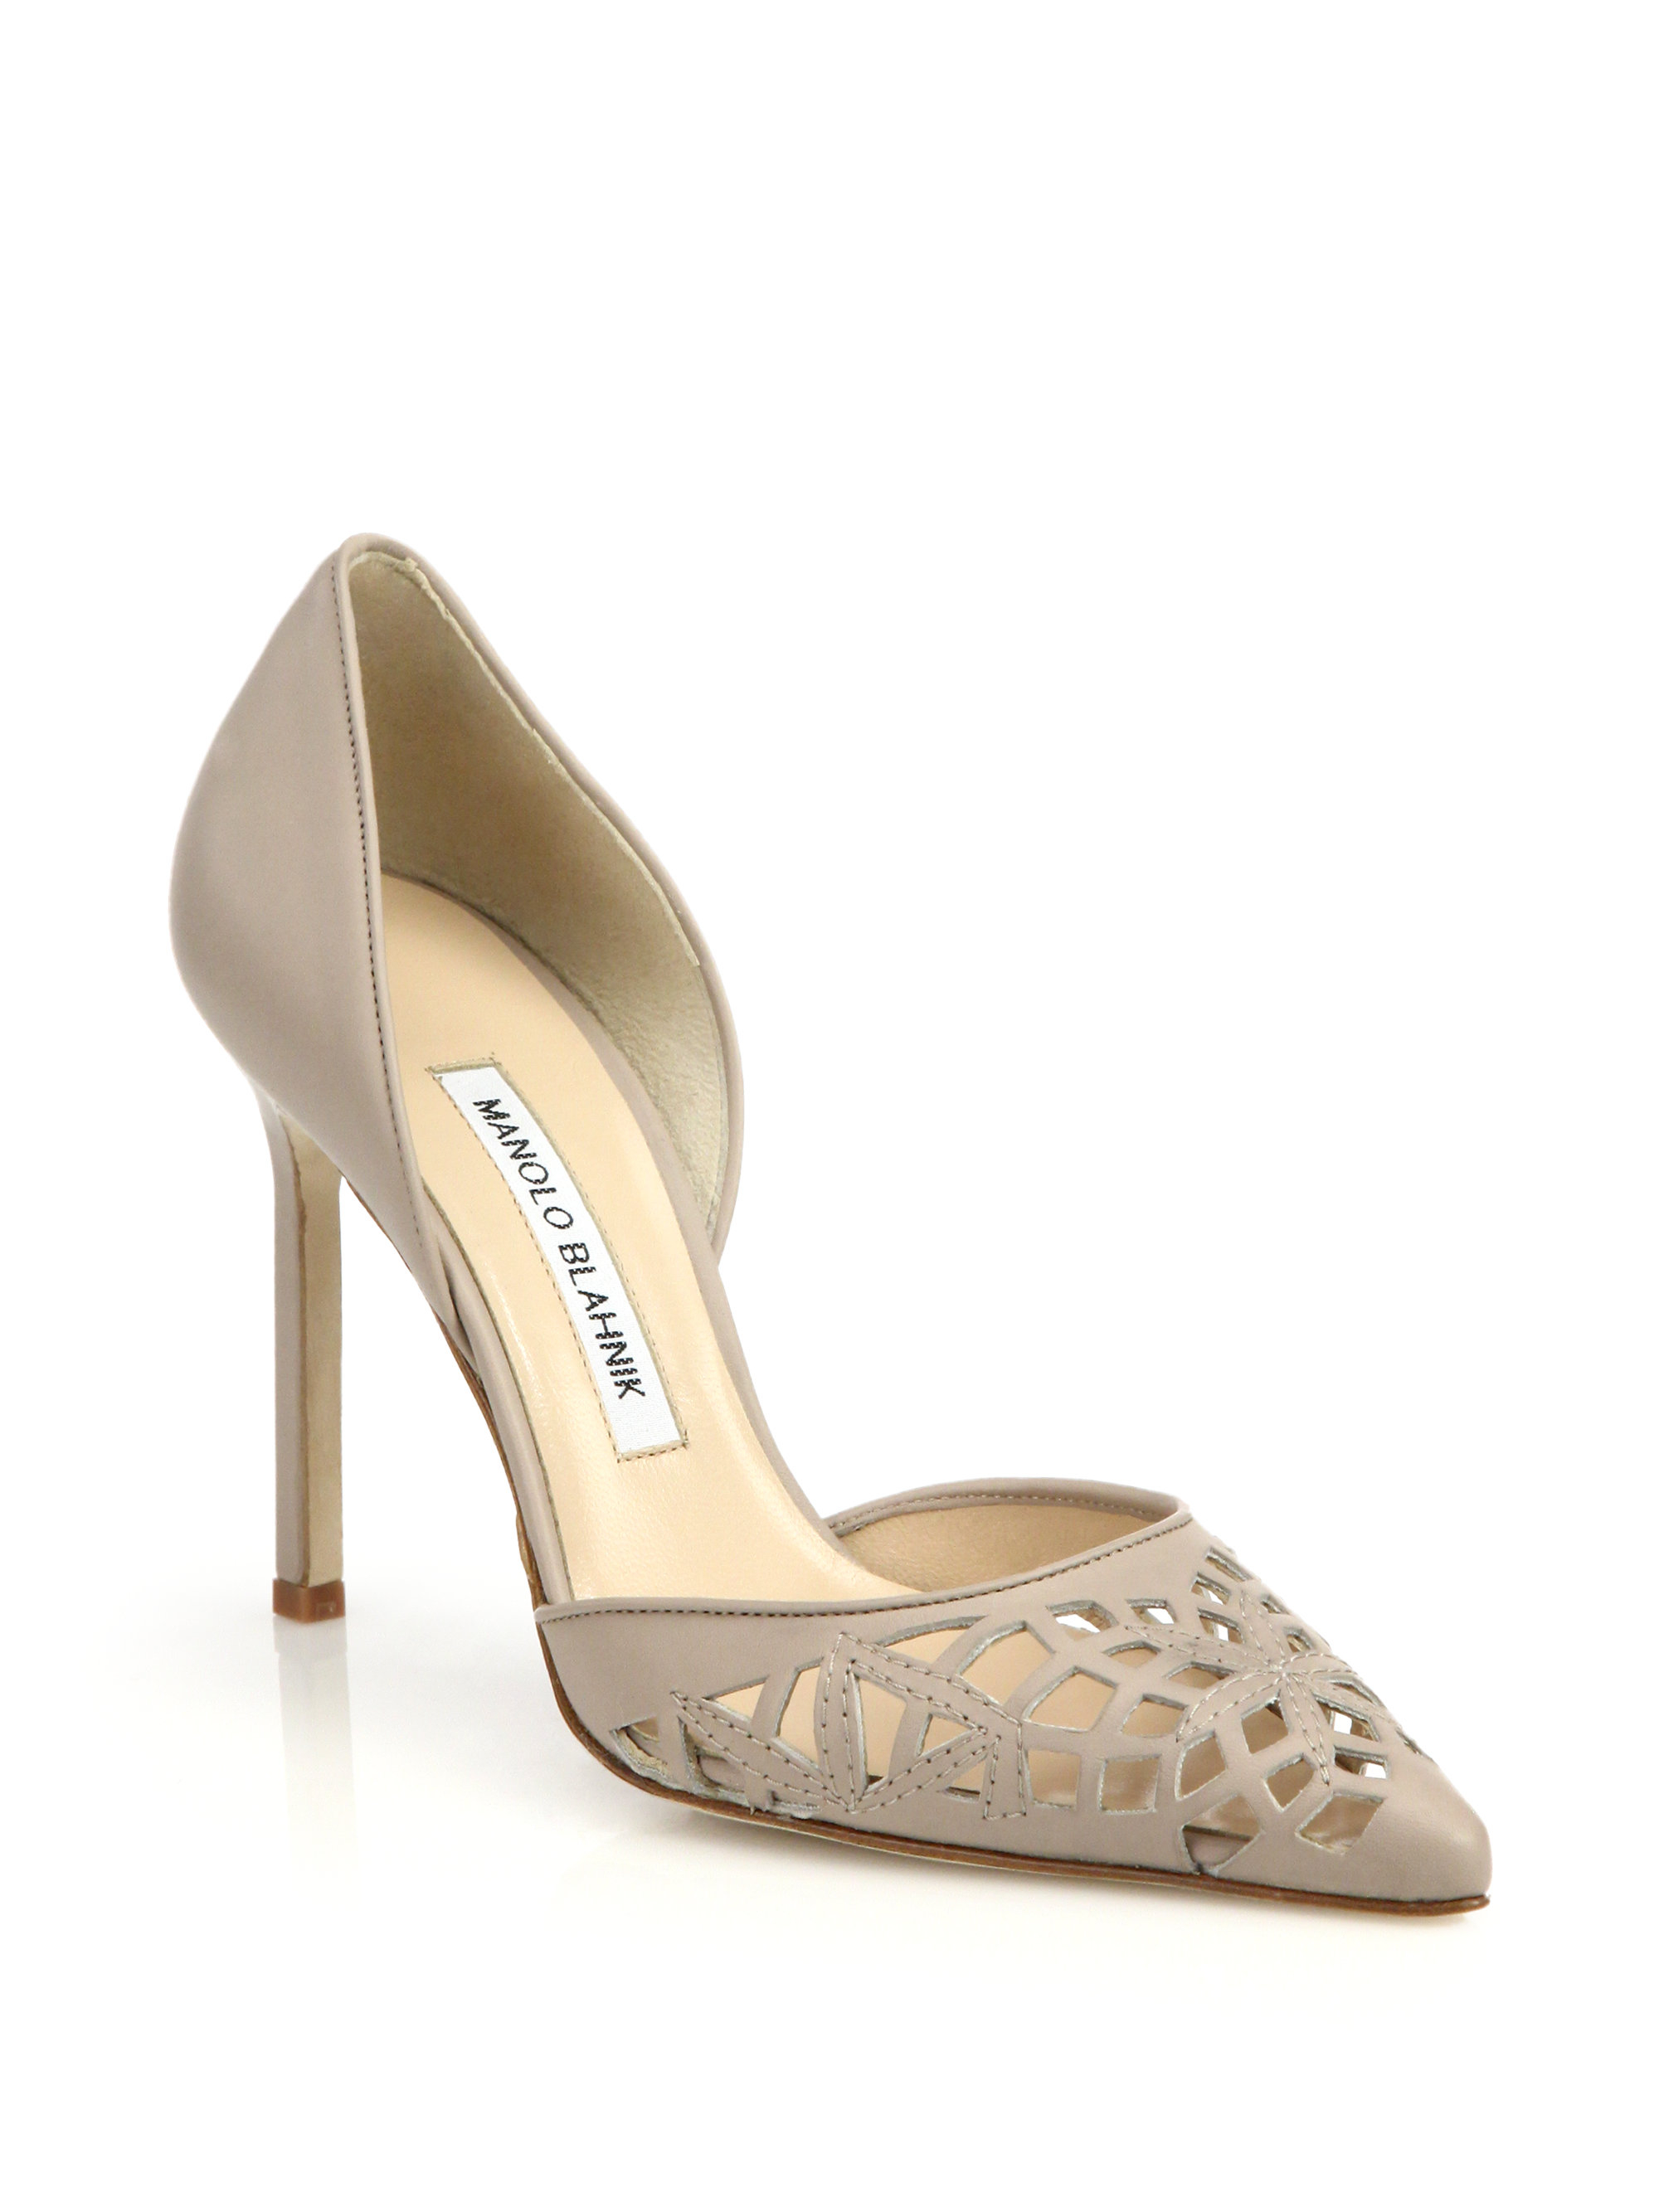 Lyst - Manolo Blahnik Cutout Leather D'orsay Pumps in Natural